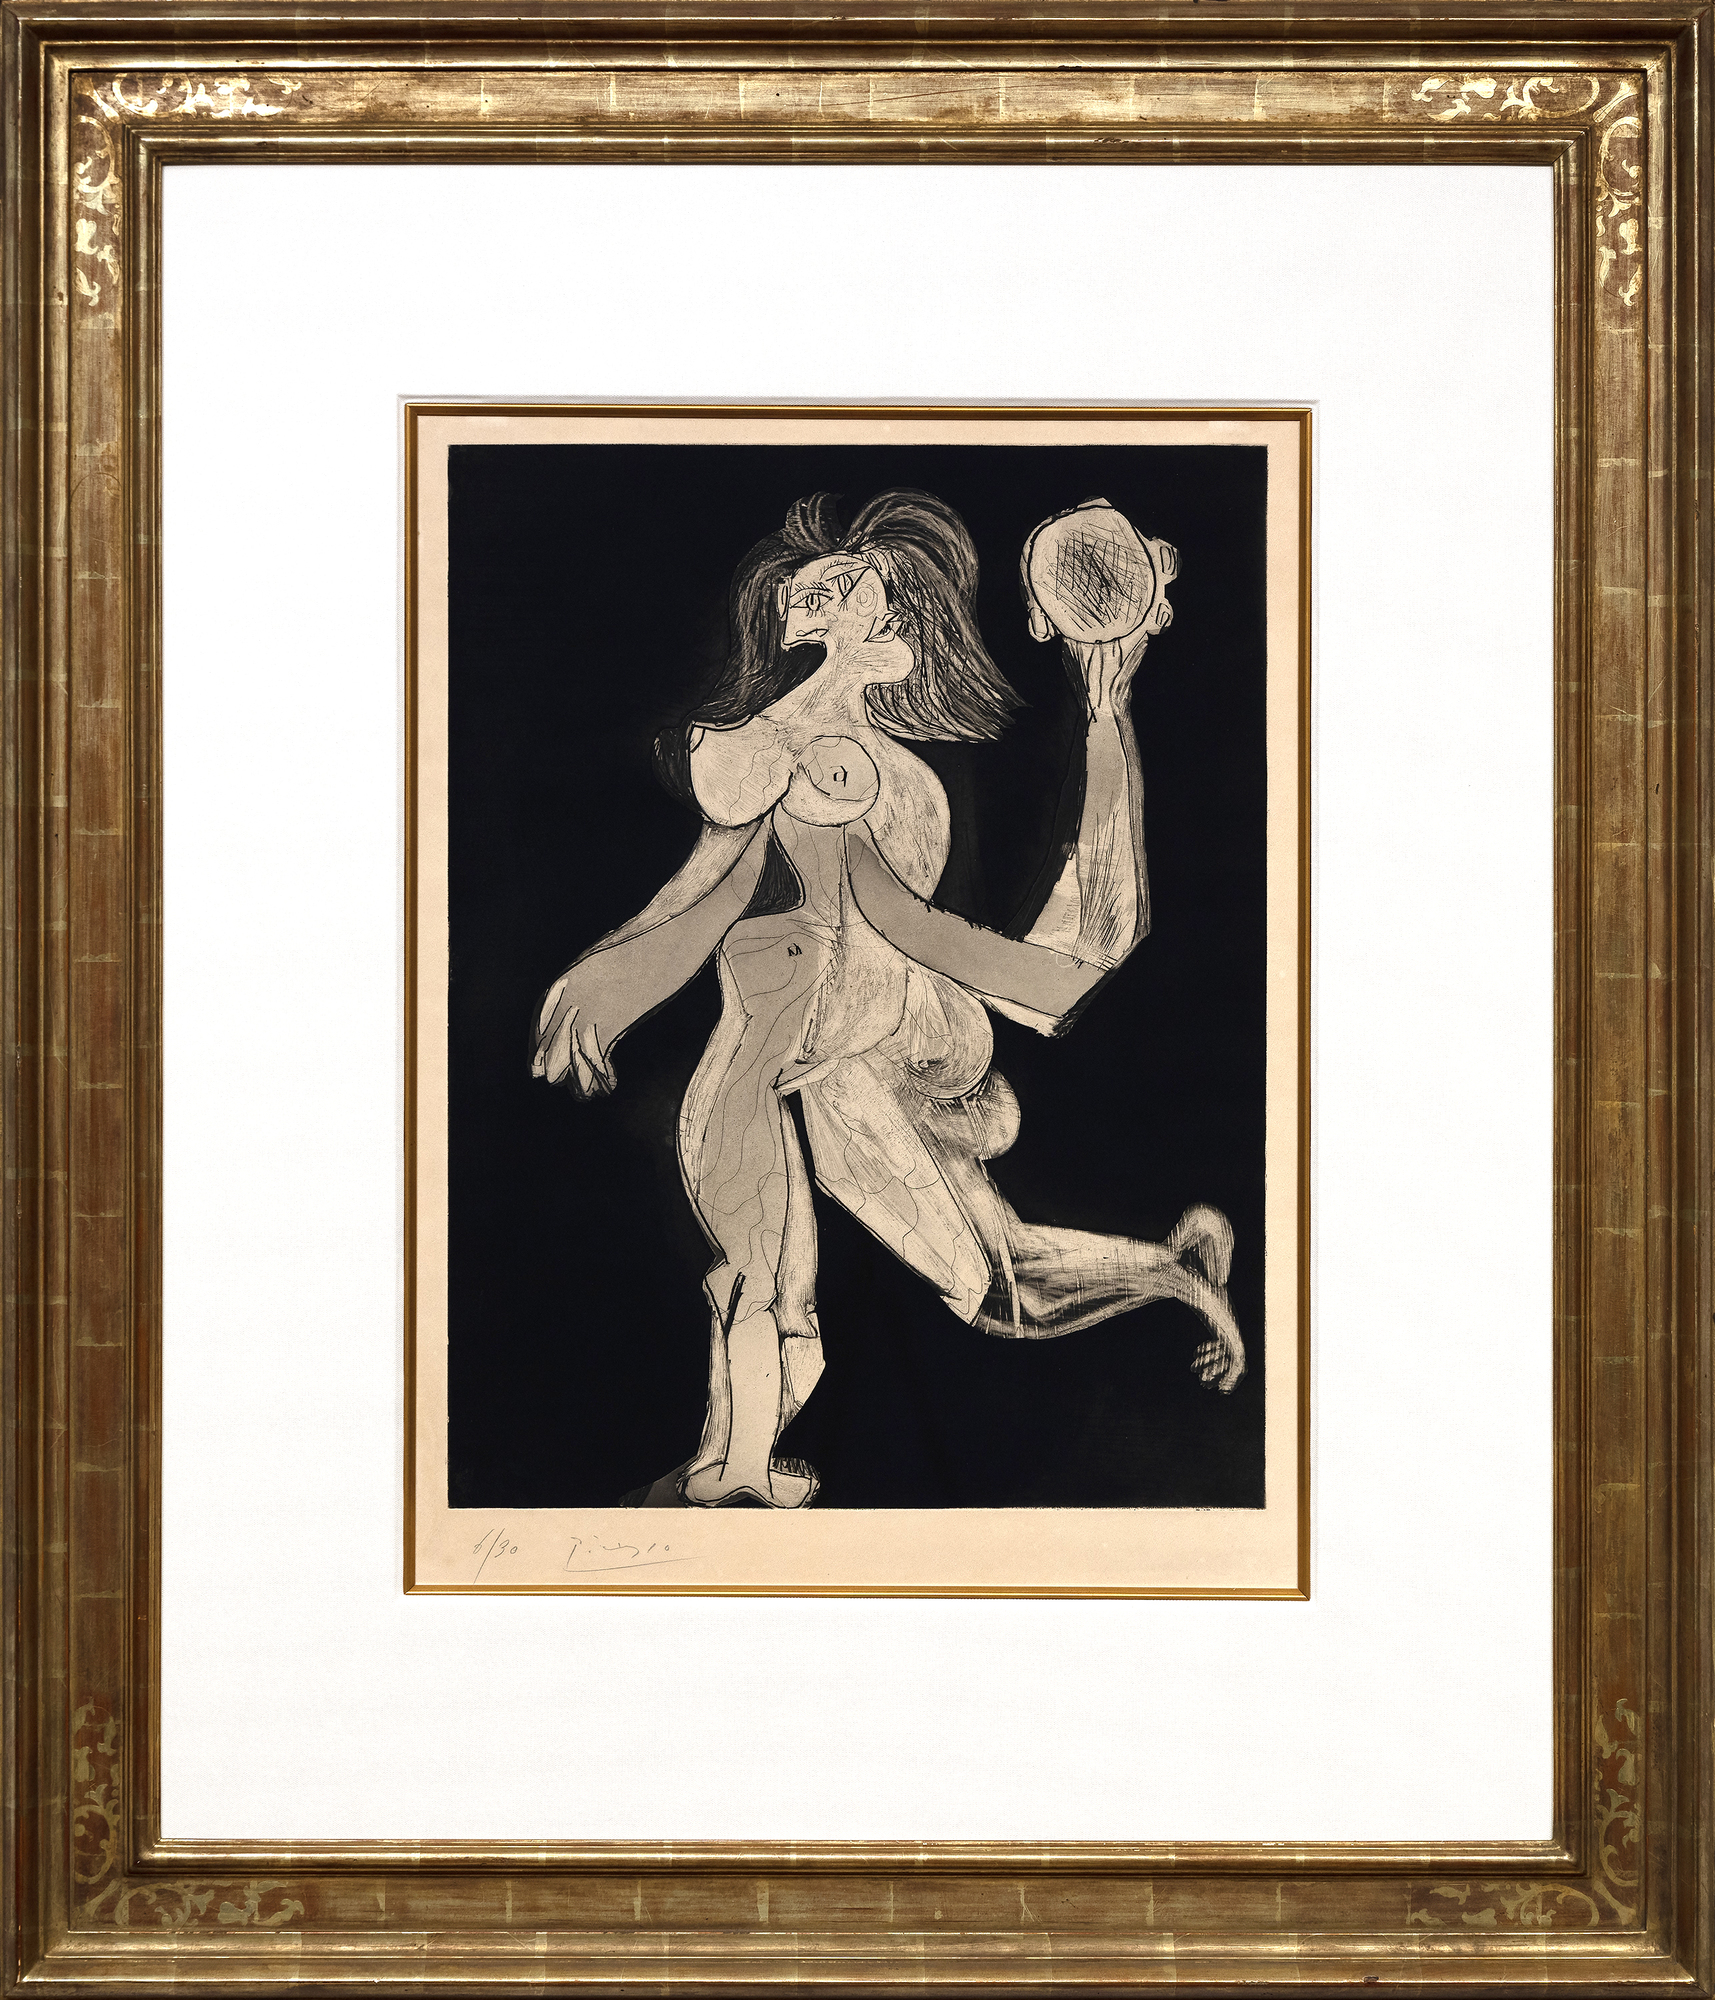 &quot;La femme au tambourin&quot; (1939) is one of Pablo Picasso’s greatest graphic works. Partially based on compositions by Degas and Poussin, the work exudes a strong Classical presence with a Modernist edge. Thought to be a depiction of Dora Maar, Picasso’s lover at the time, the print is highly coveted by institutional and private collectors. One impression from this edition is included in the permanent collection of the Museum of Modern Art, New York, and another is included in the National Gallery of Art, Washington, D.C.&lt;br&gt;&lt;br&gt;Picasso’s experimentations in printmaking began in the first decade of the 20th century and engaged him for many decades, into the 1970s. In this time, Picasso embraced multiple methods of printmaking, including lithography, etching, aquatint, and linoleum block printing. His earliest prints were, like the present work, intaglio. With La femme au tambourin, Picasso incorporated the additional medium of aquatint, which yielded a watercolor-like effect throughout the composition and an extreme range of tonal qualities. This technique in particular afforded opportunities for expression that could not be found in painting. For his experimental reach and depth of mastery, Picasso’s corpus of graphic work is among the most highly respected and coveted in the history of art, rivaling that of Rembrandt.